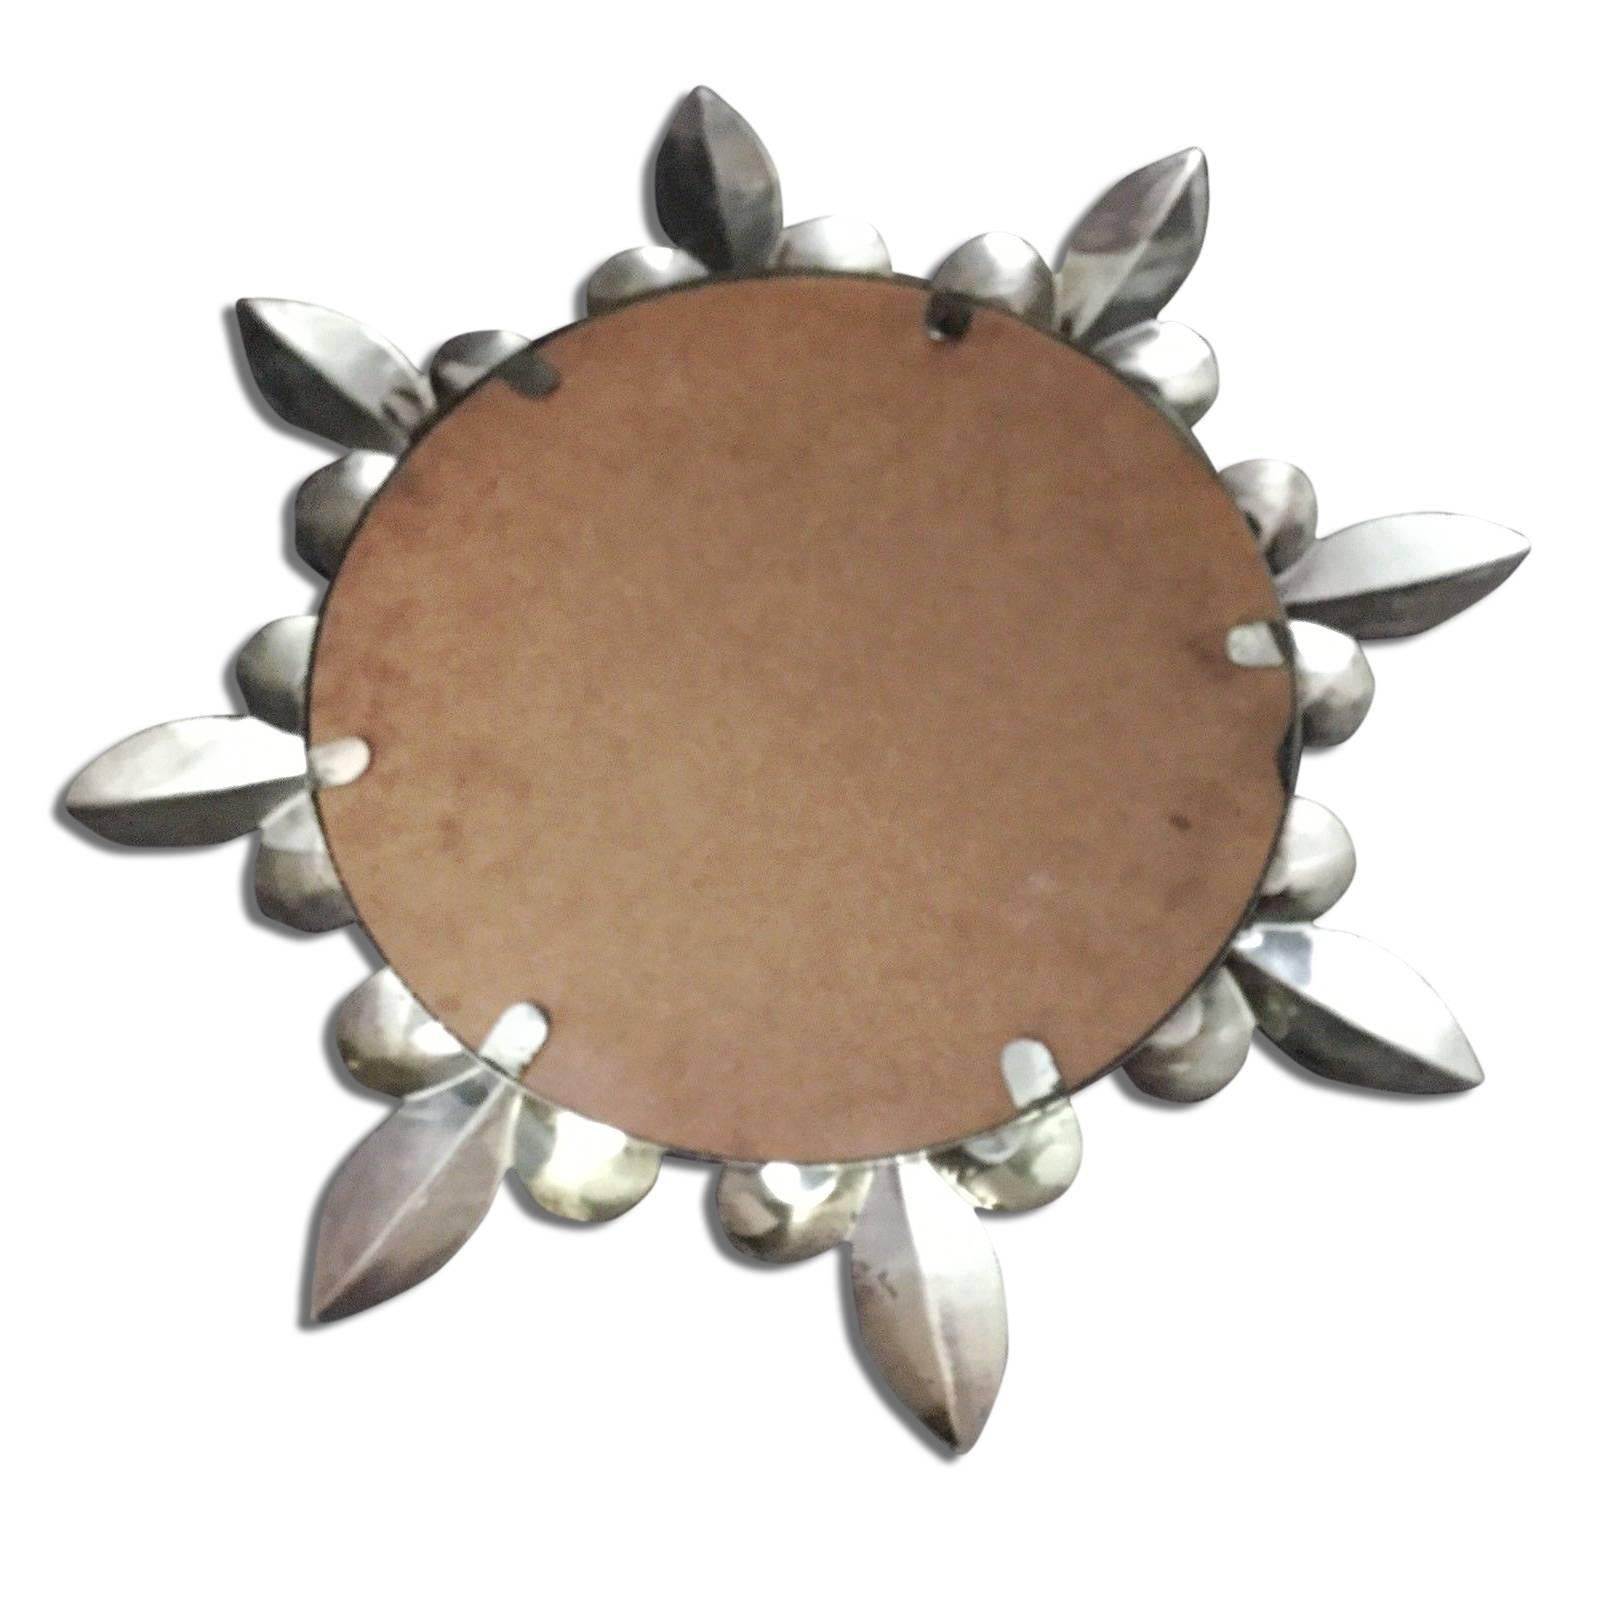 Stunning sunburst fleur-de-lys bronze wall mirror.
The mirror is in very good vintage condition with no damage nor tarnish.
Gorgeous mirror with a vintage glamour feel to it. This mirror is a focal point in any room, with its iconic starburst